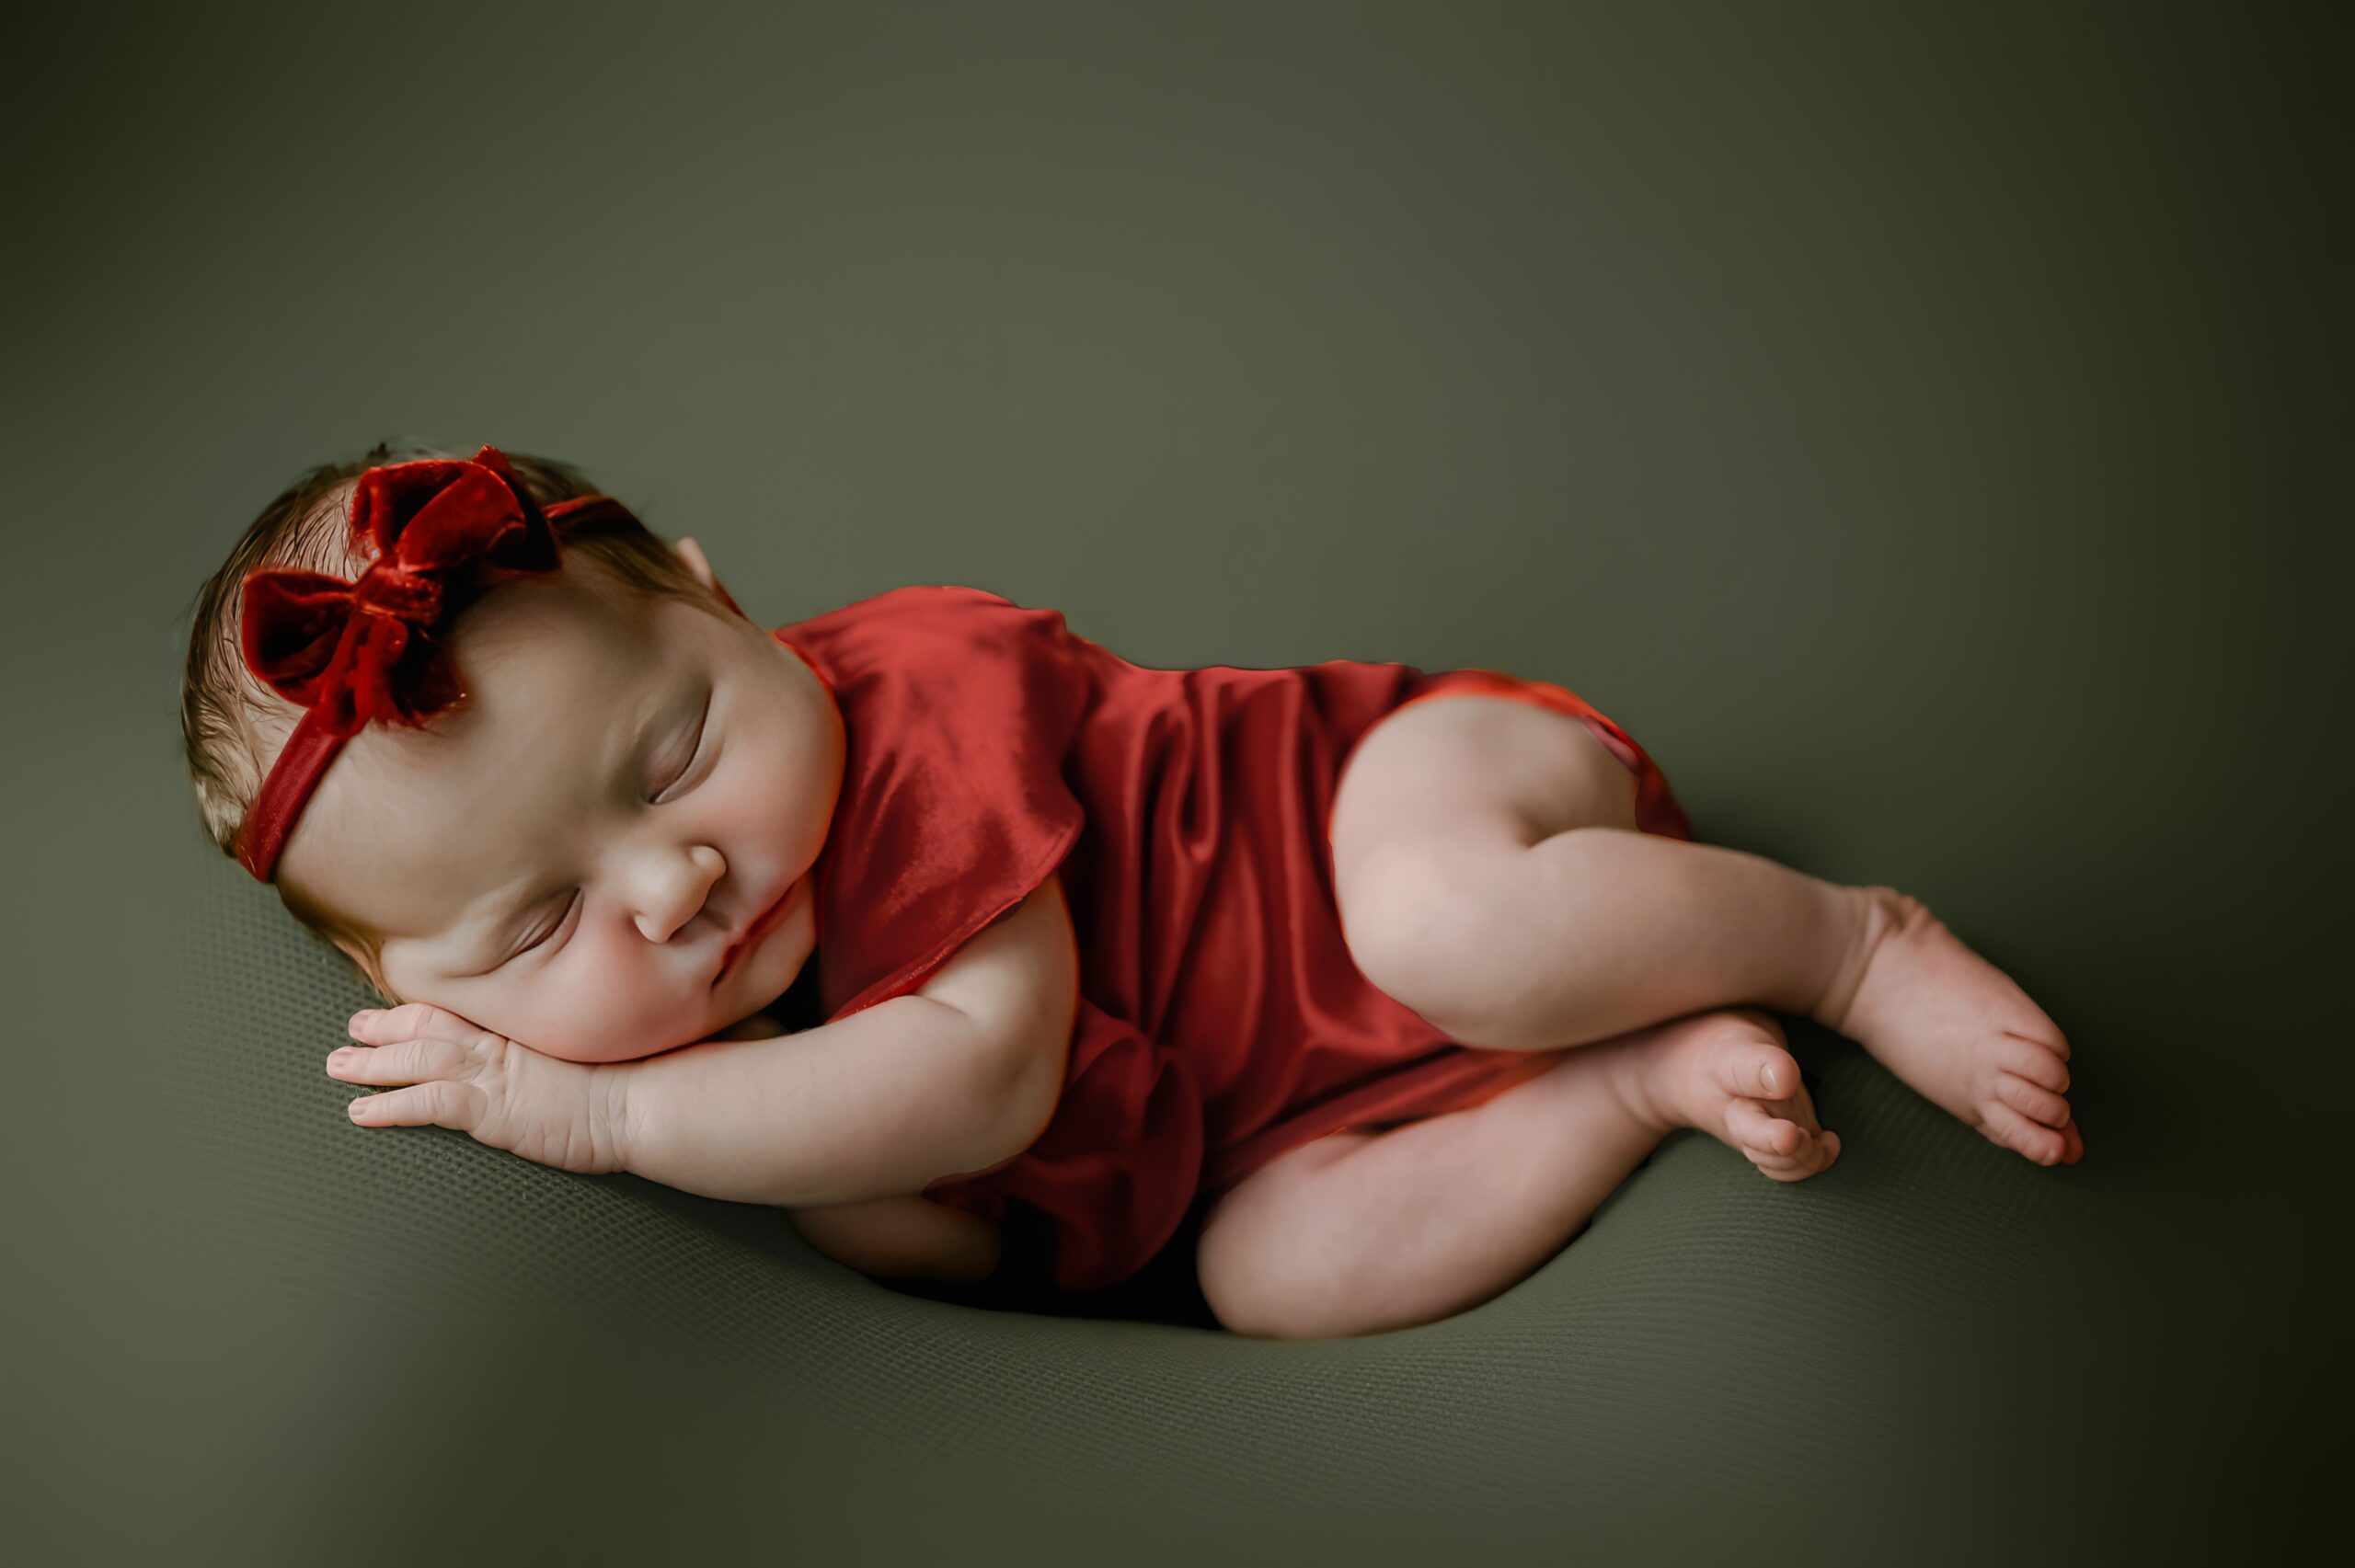 Newborn photography by Lisa Rowland At Perfect-photos.com in Studio